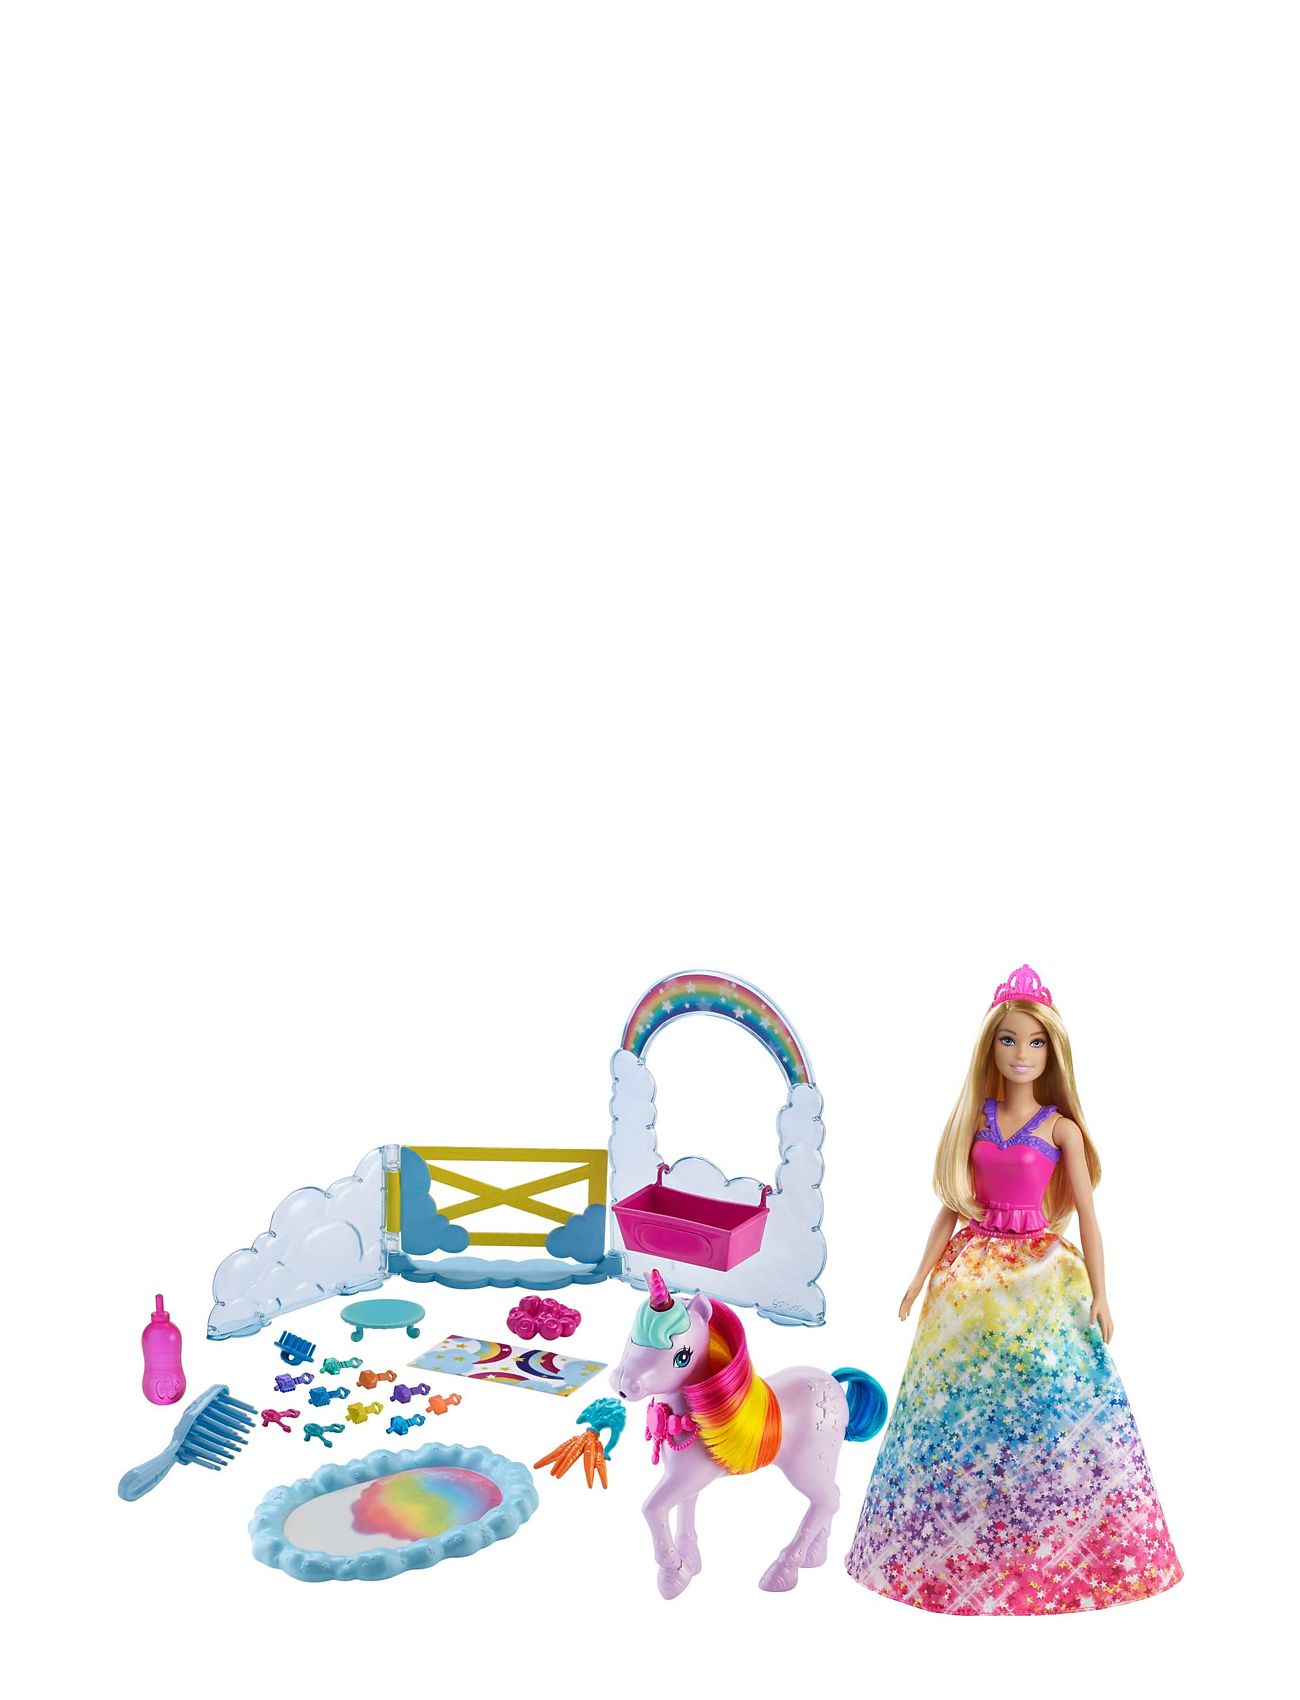 Dreamtopia Doll And Unicorn Toys Dolls & Accessories Dolls Multi/patterned Barbie